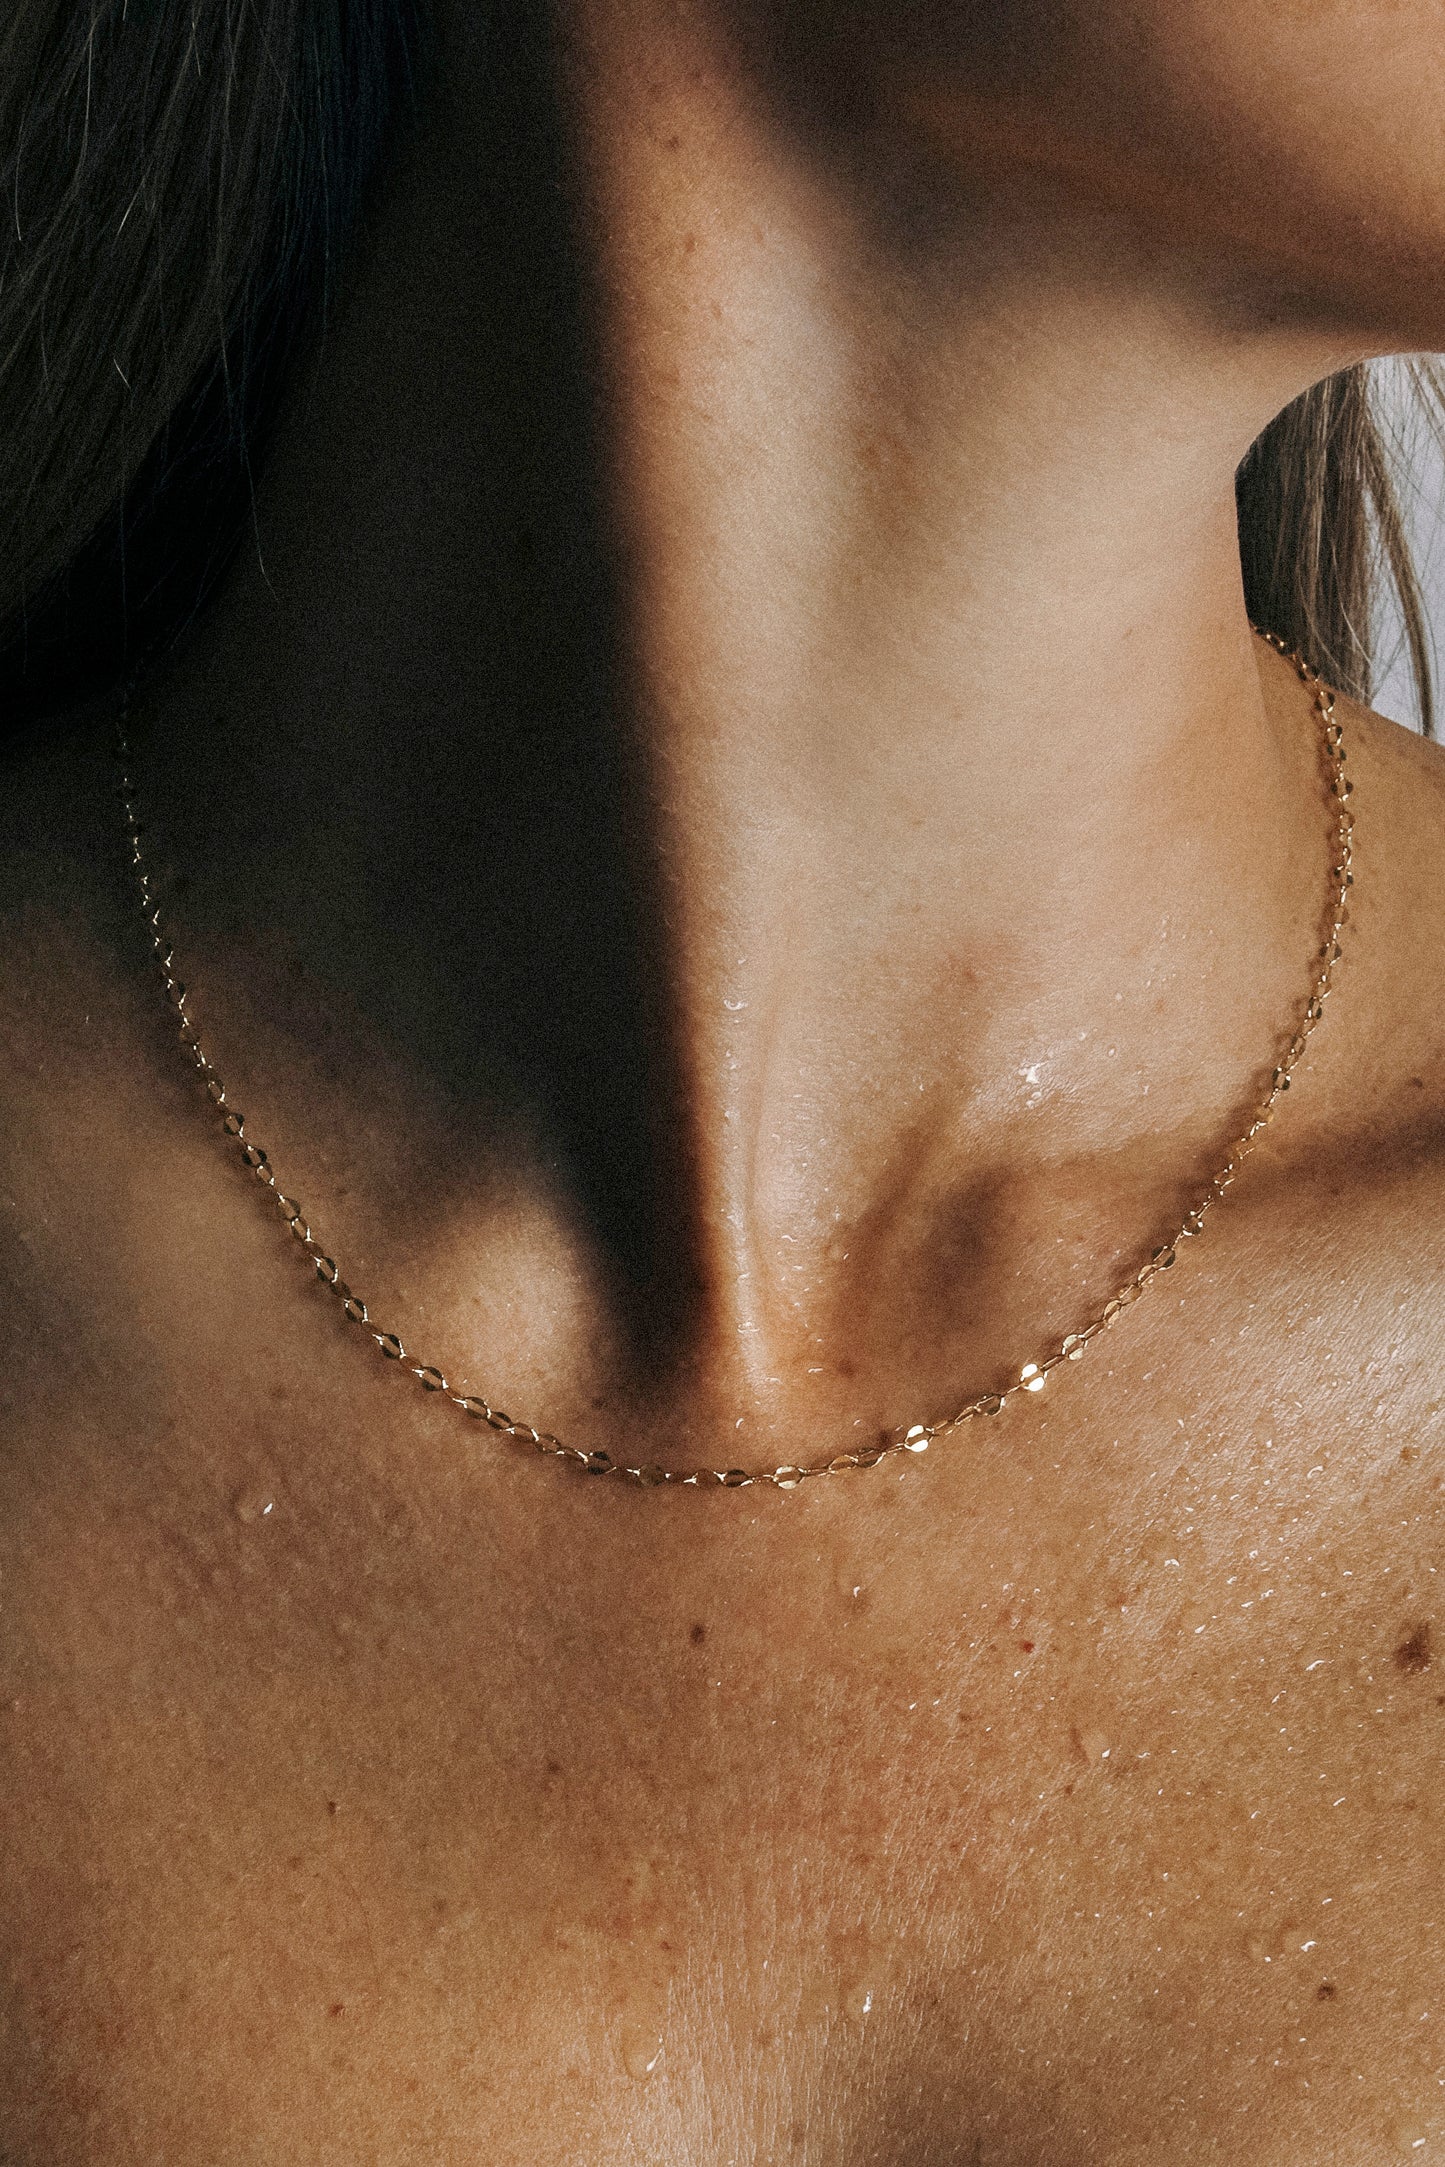 Reflection Chain Necklace